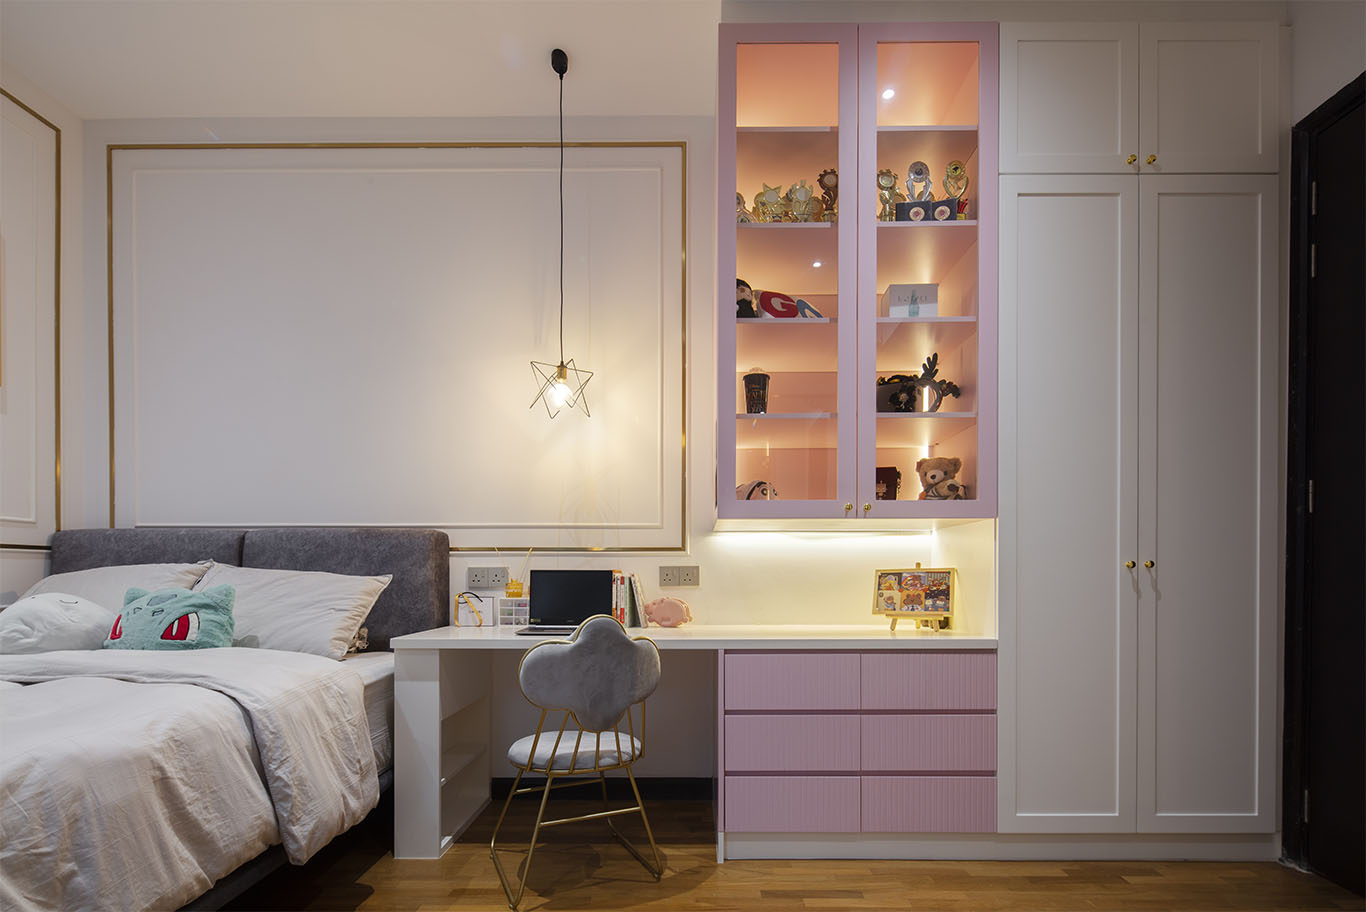 MIEUX La Famillie De Lee modern bedroom design with white study table with pink built in drawer mieux interior design